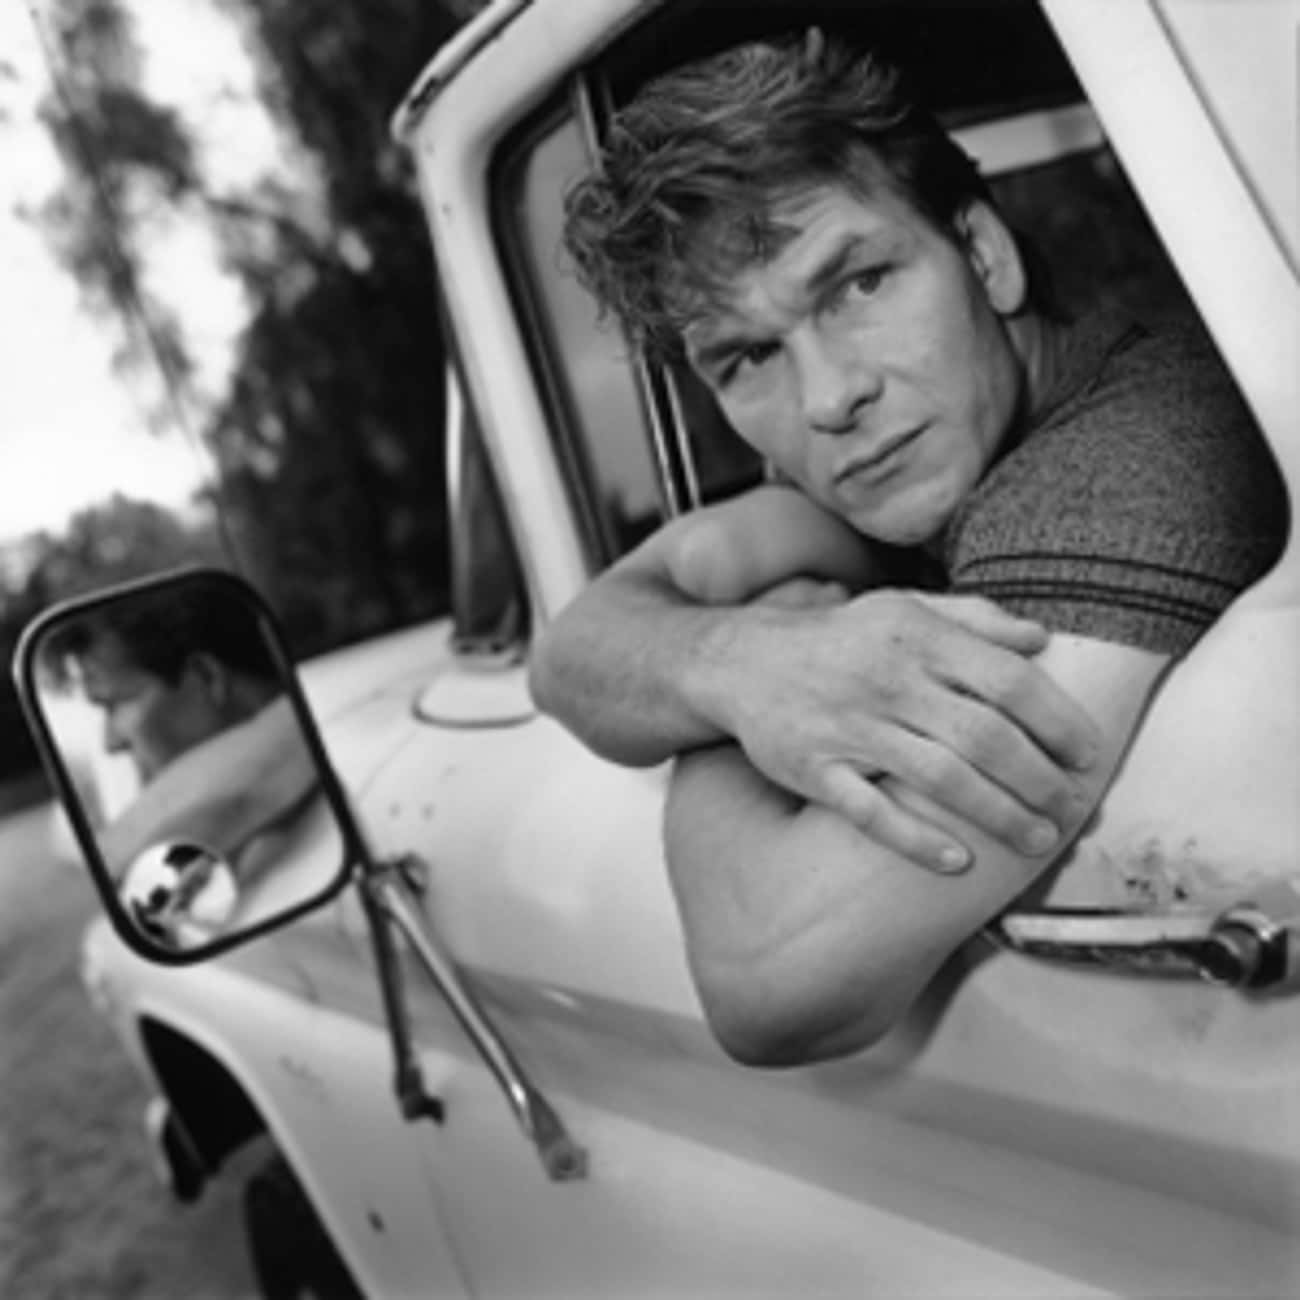 Young Patrick Swayze in Pickup Truck